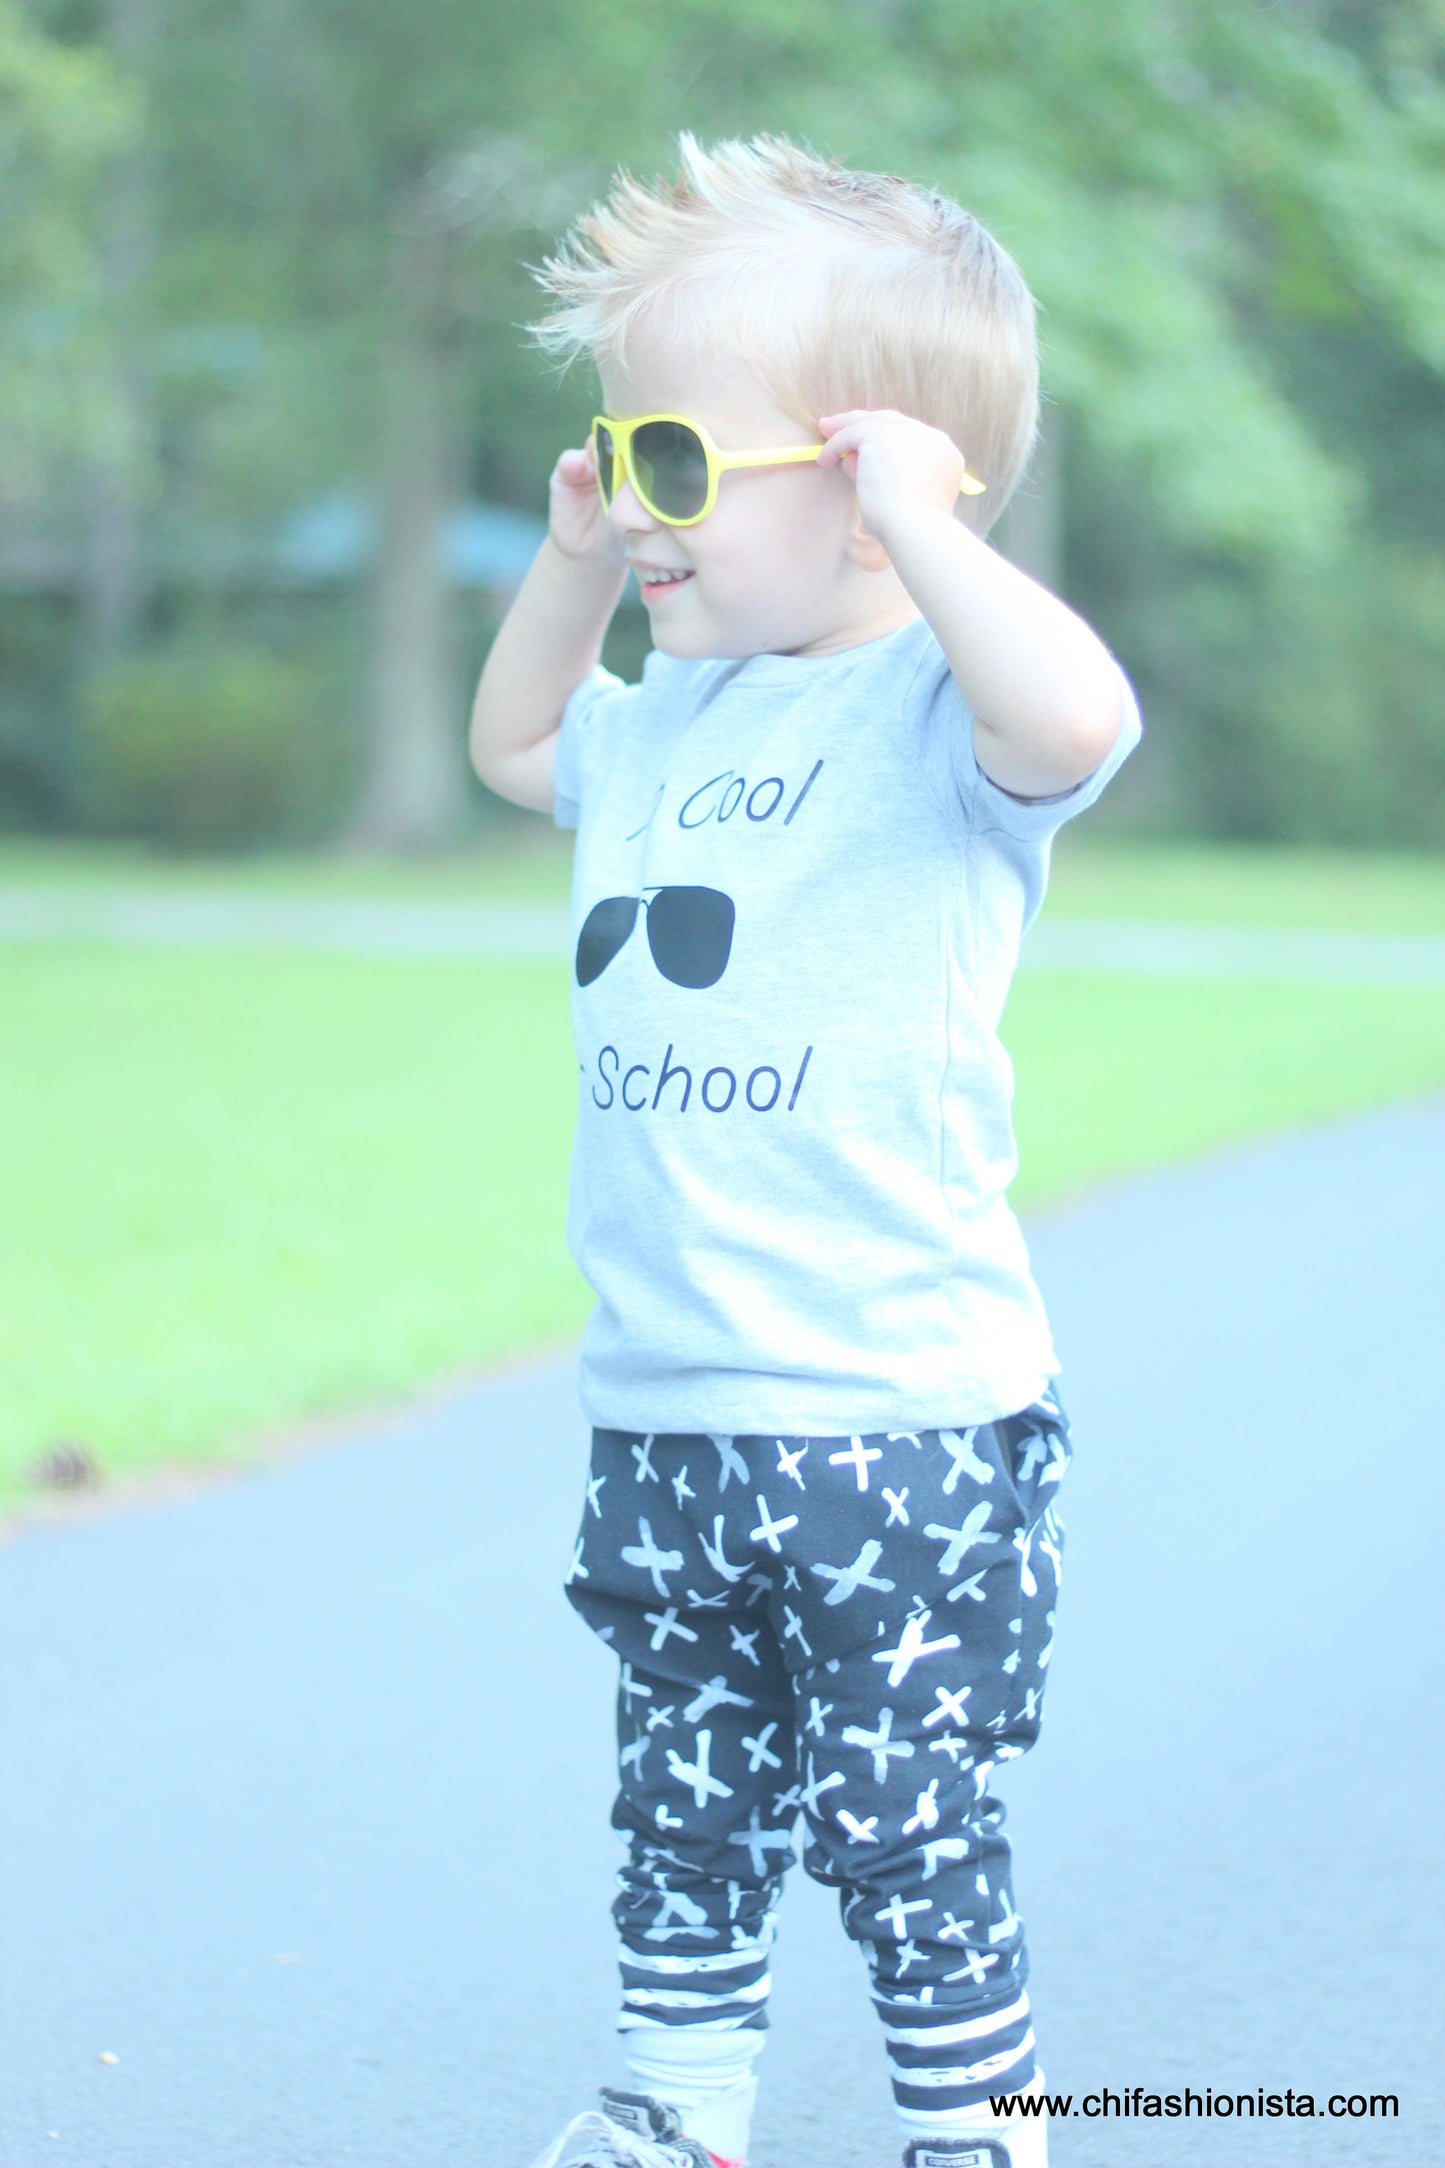 Handcrafted Children's Clothing, Clothing for Children and Parents, Too Cool for School T-Shirt, chi-fashionista